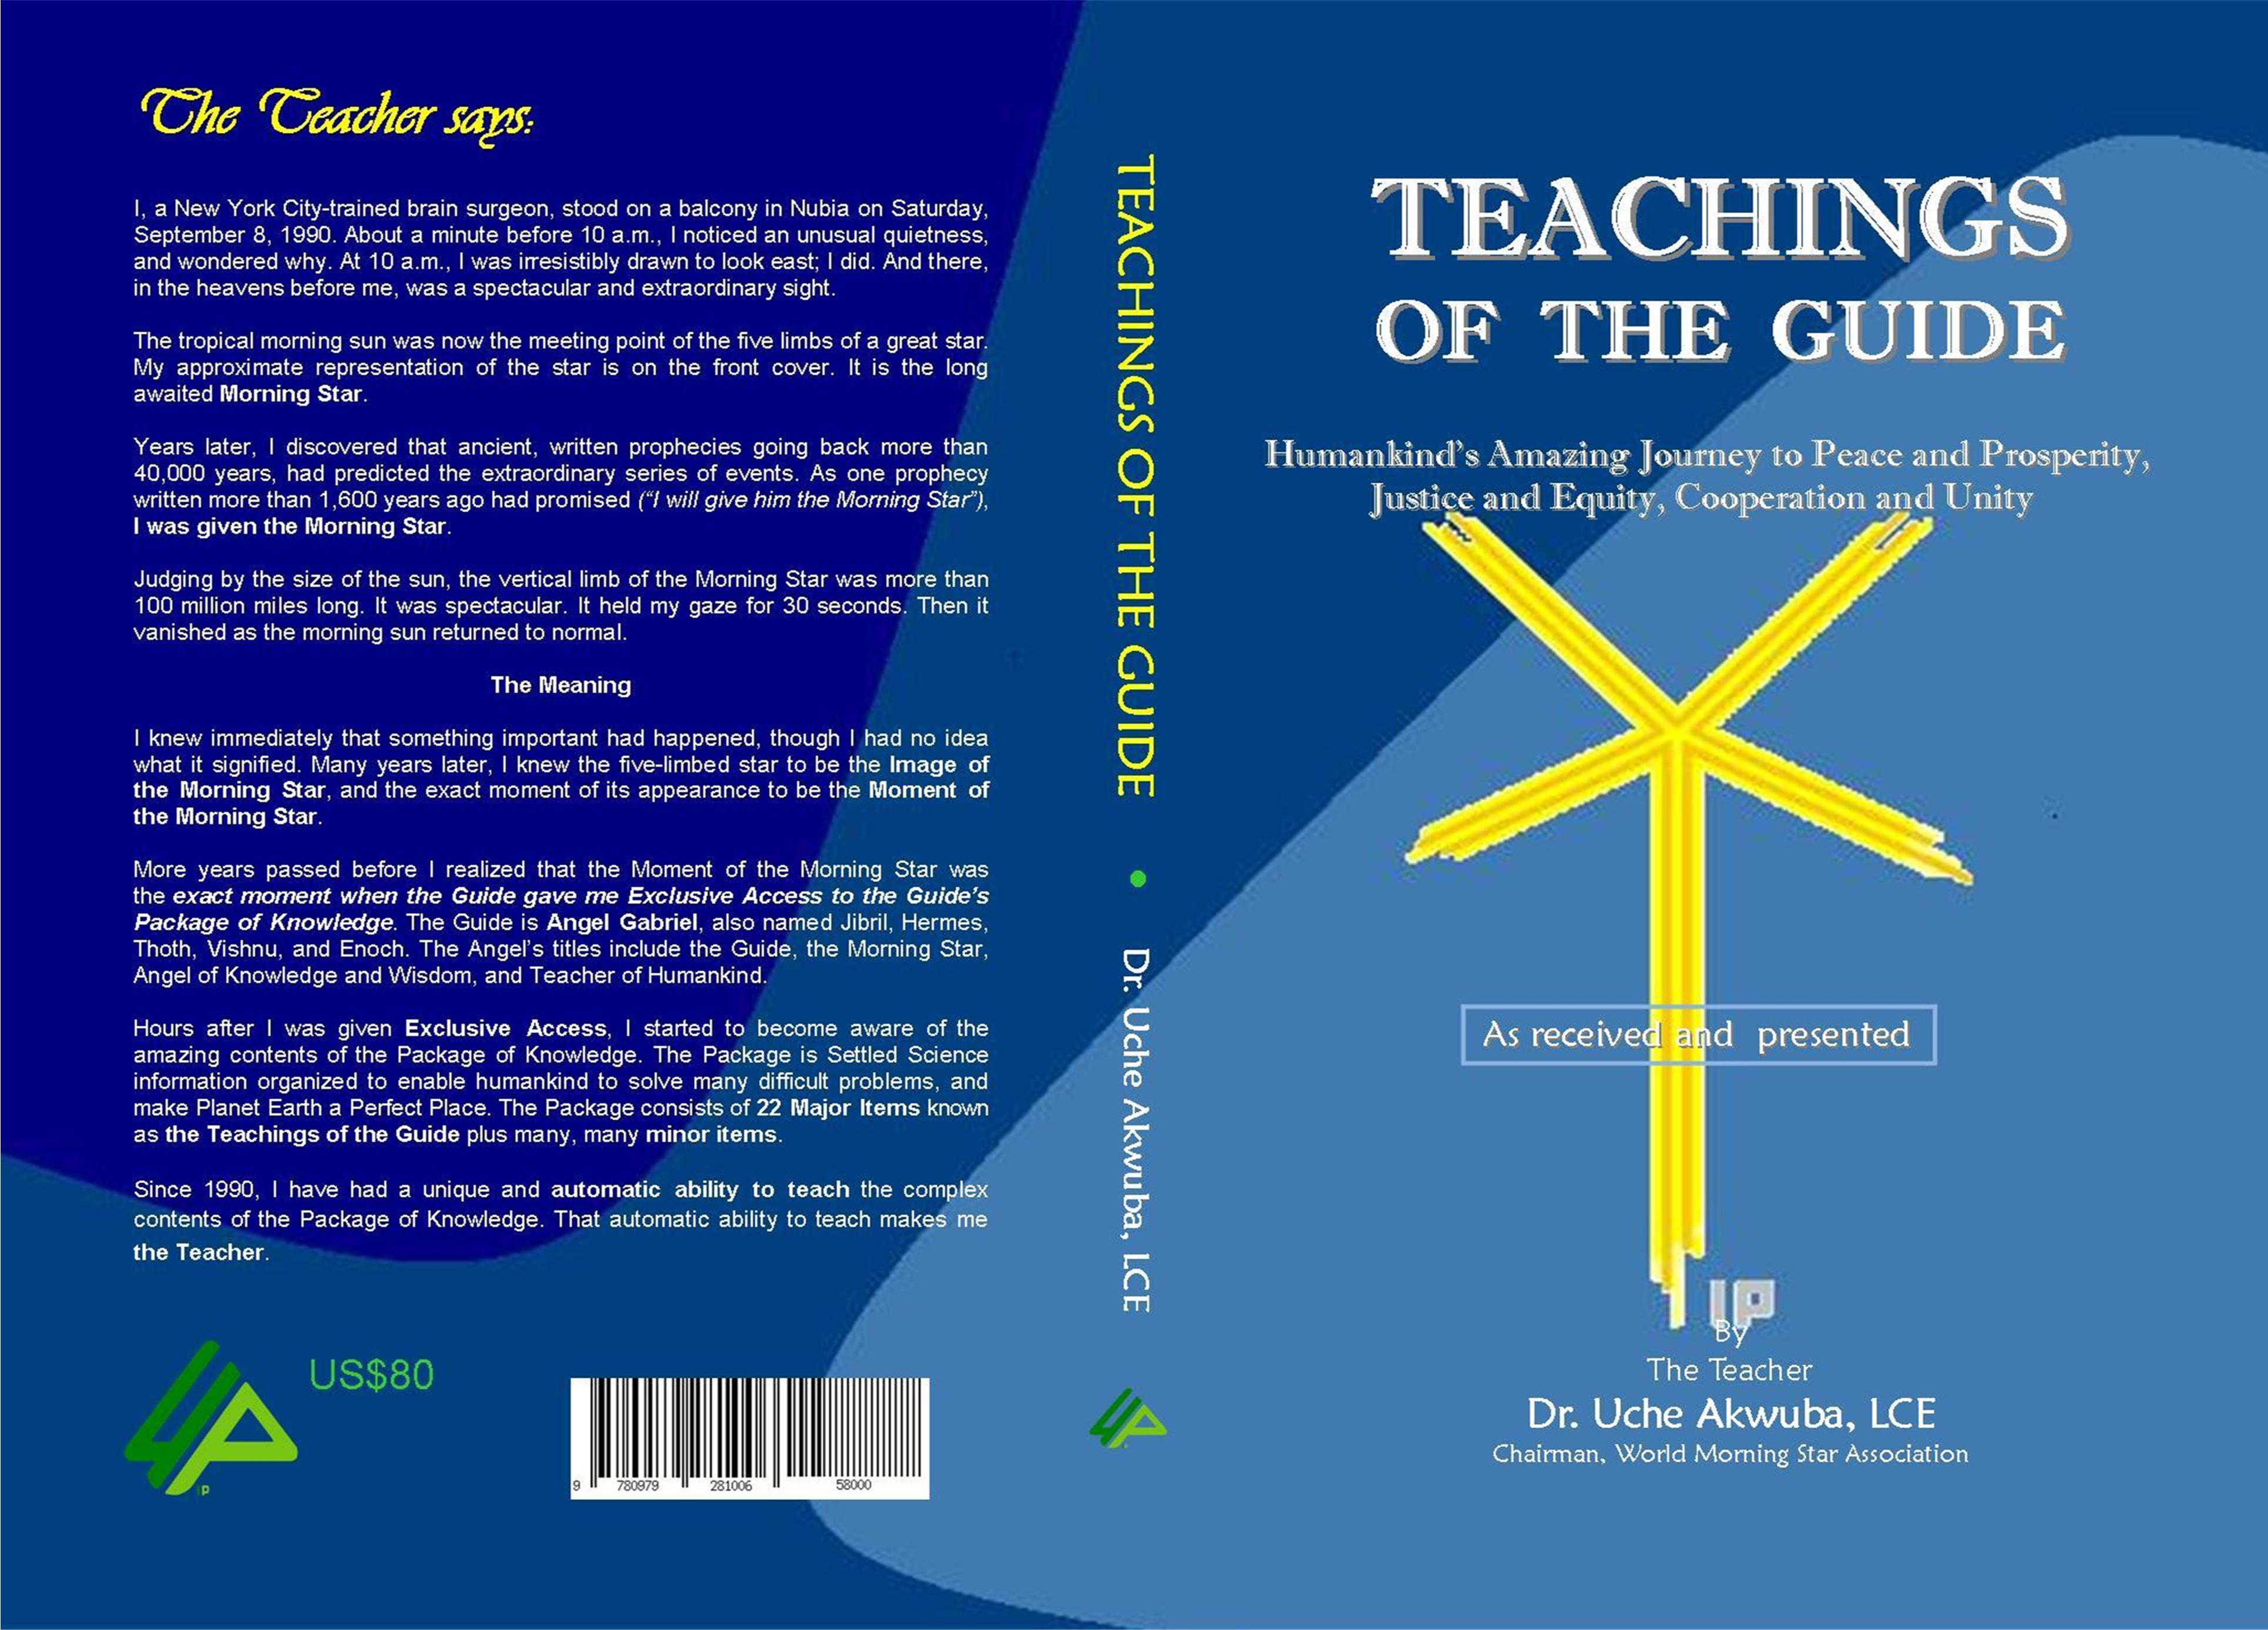 TEACHINGS OF THE GUIDE: Humankind